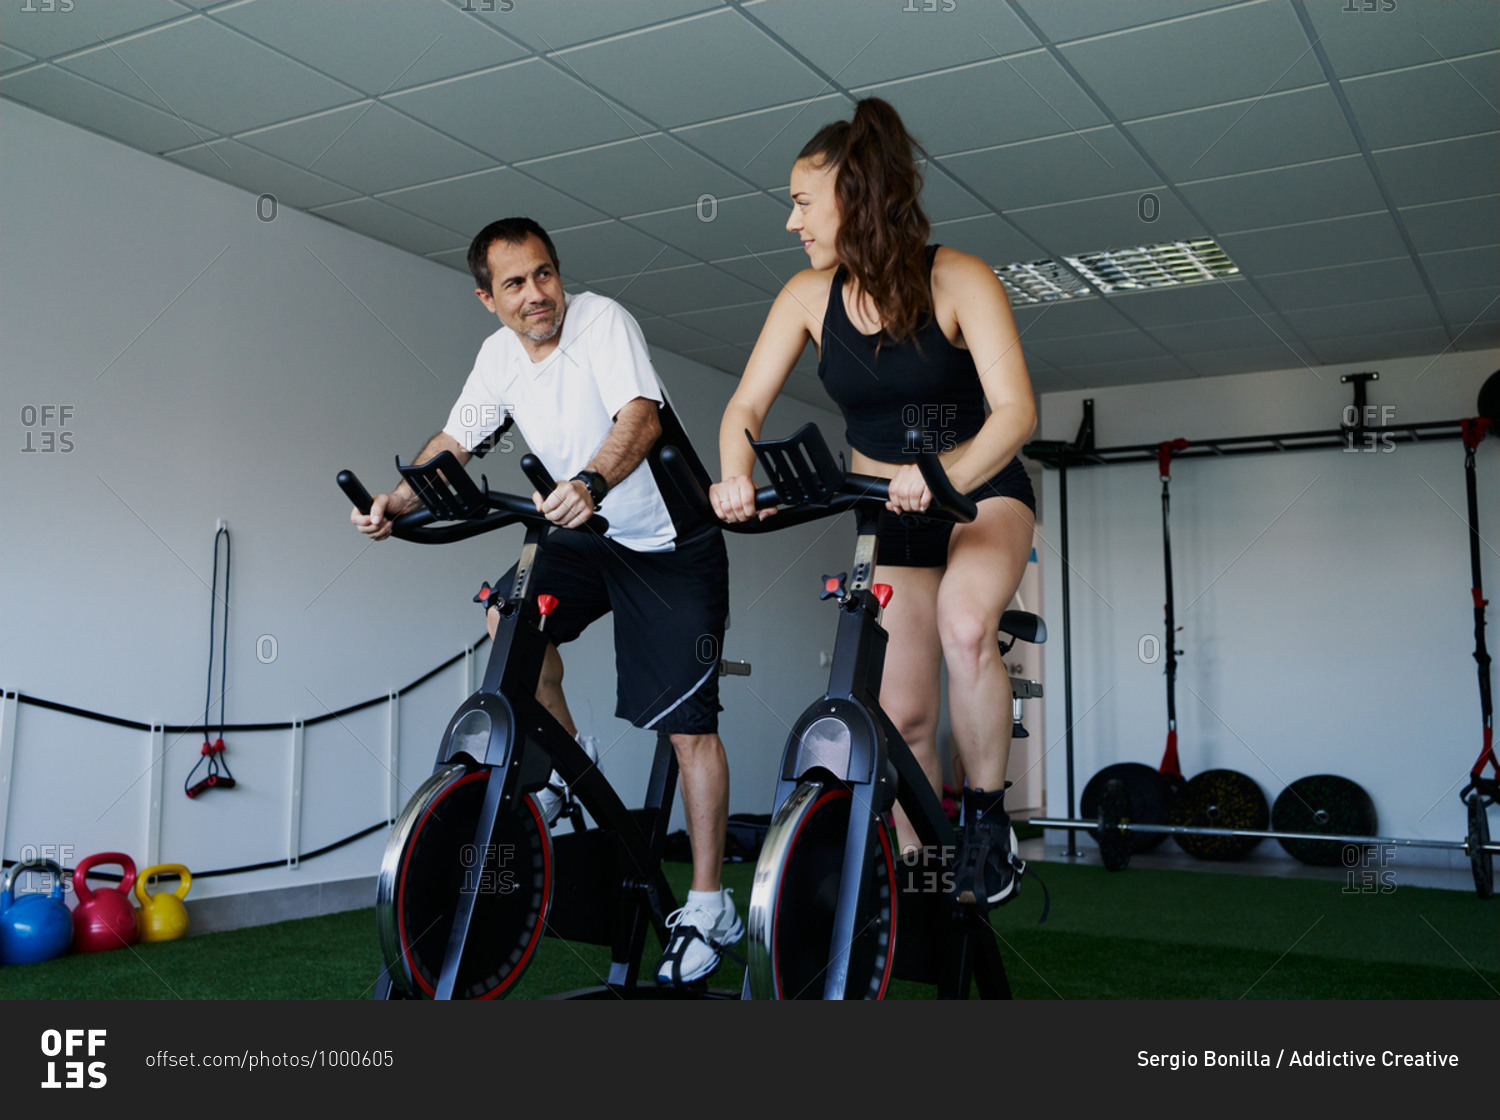 Muscular sportsman and sportswoman doing cardio exercises on cycling machines in gym while talking and looking at each other